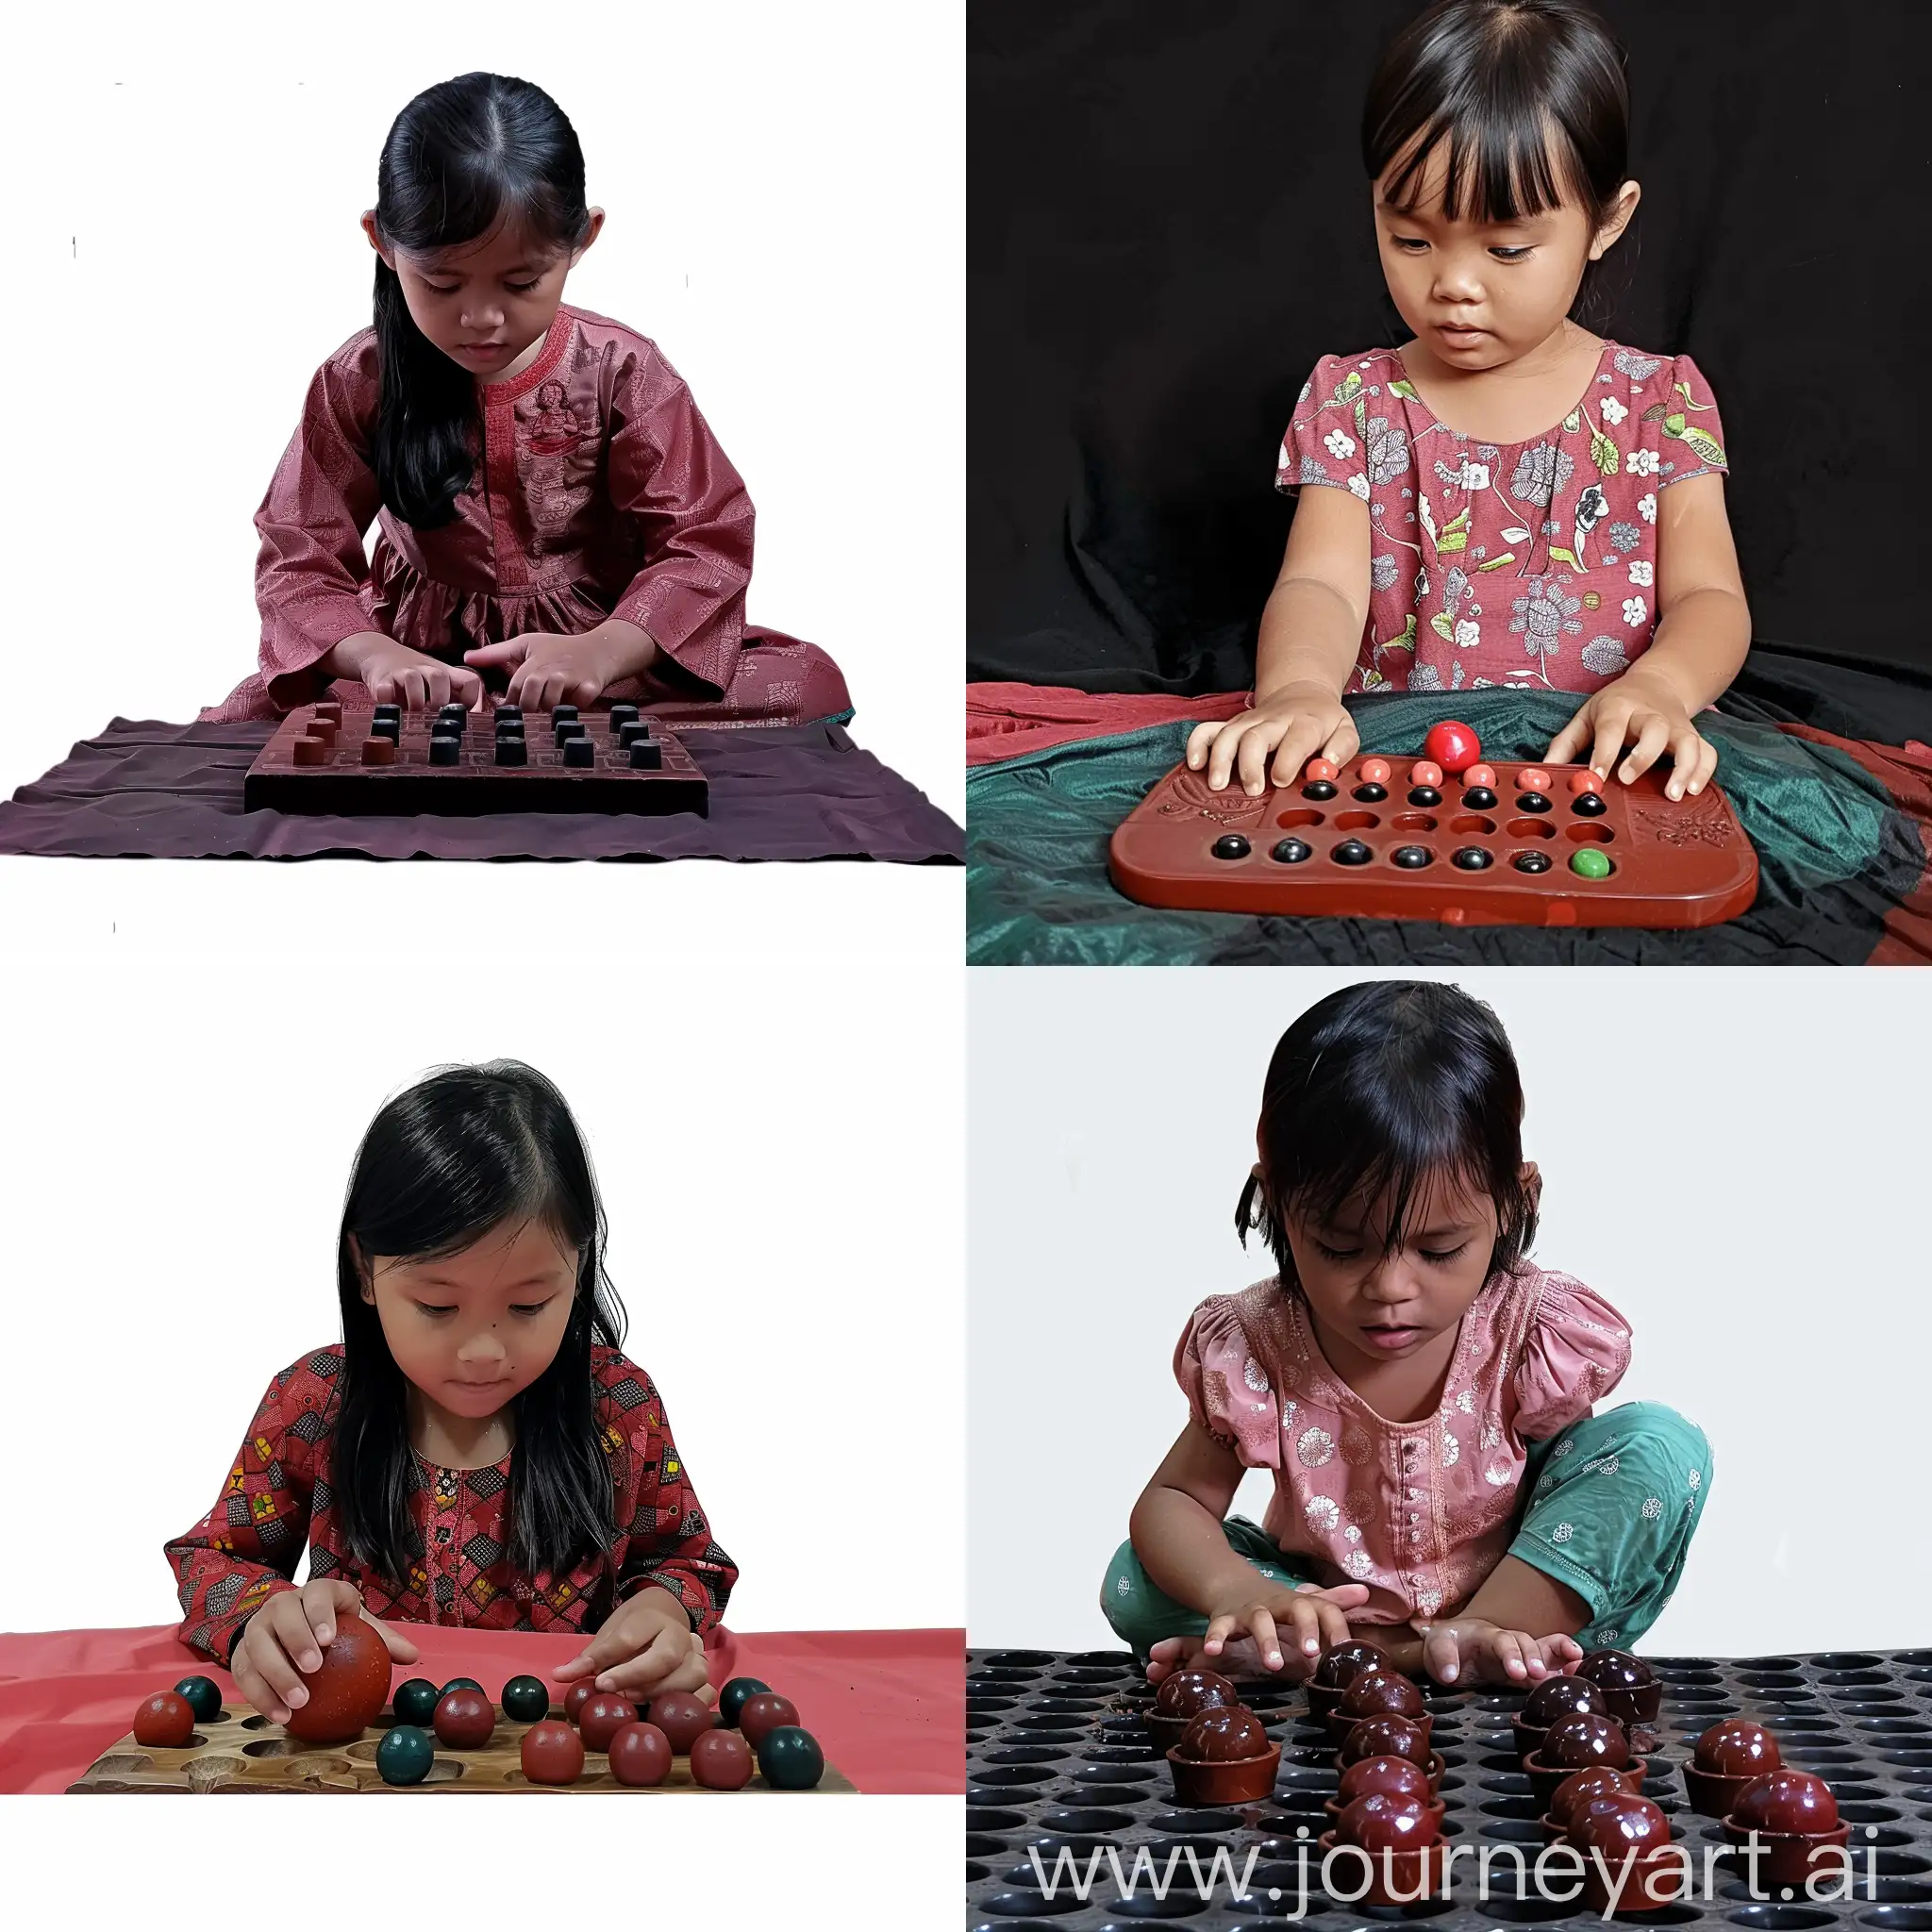 cute malay girl plaing a congkak game --sref  https://i.ibb.co/VBVPhmh/stock-photo-asian-baby-girl-playing-a-traditional-board-game-called-congkak-2333420473-removebg-prev.png